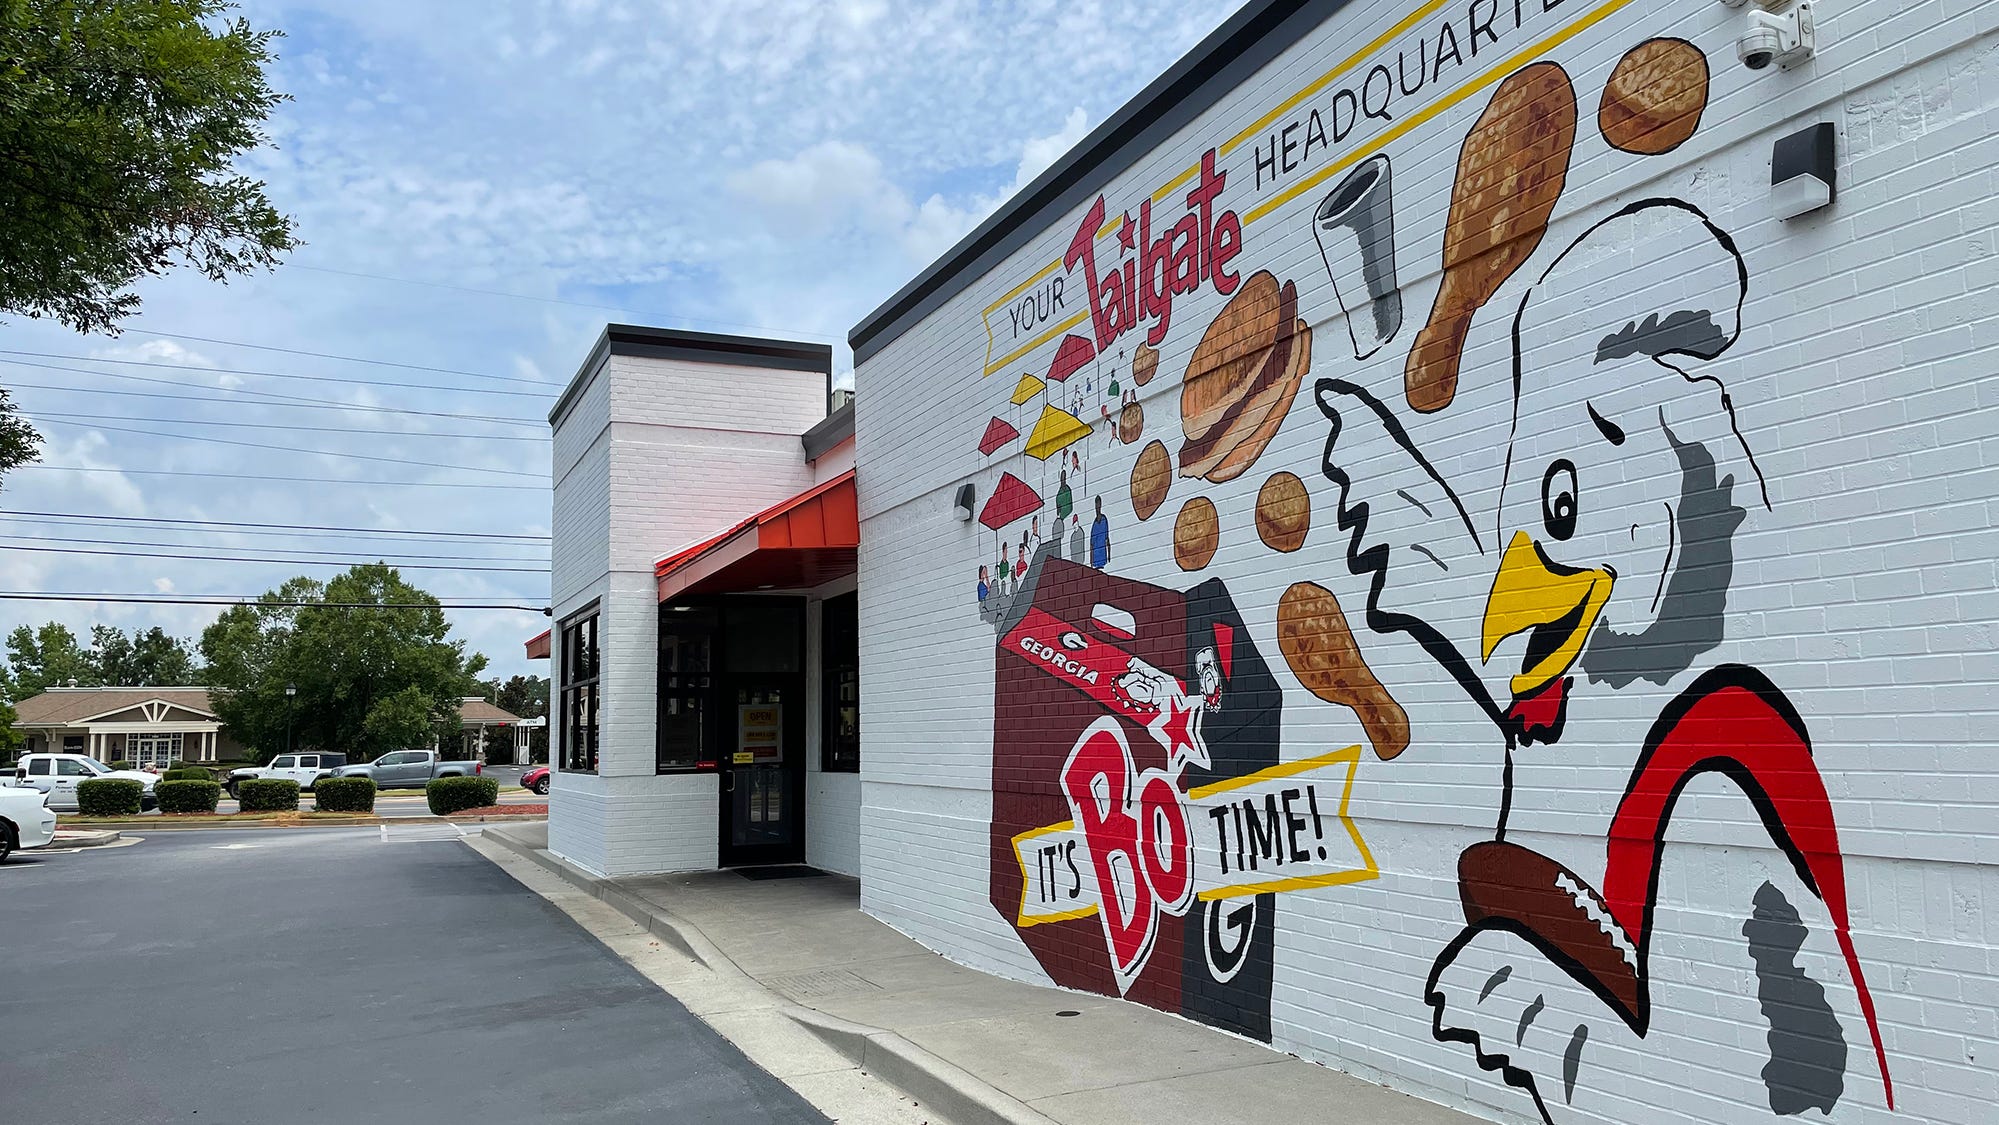 Athens restaurant supported local artist who painted mural in heatwave